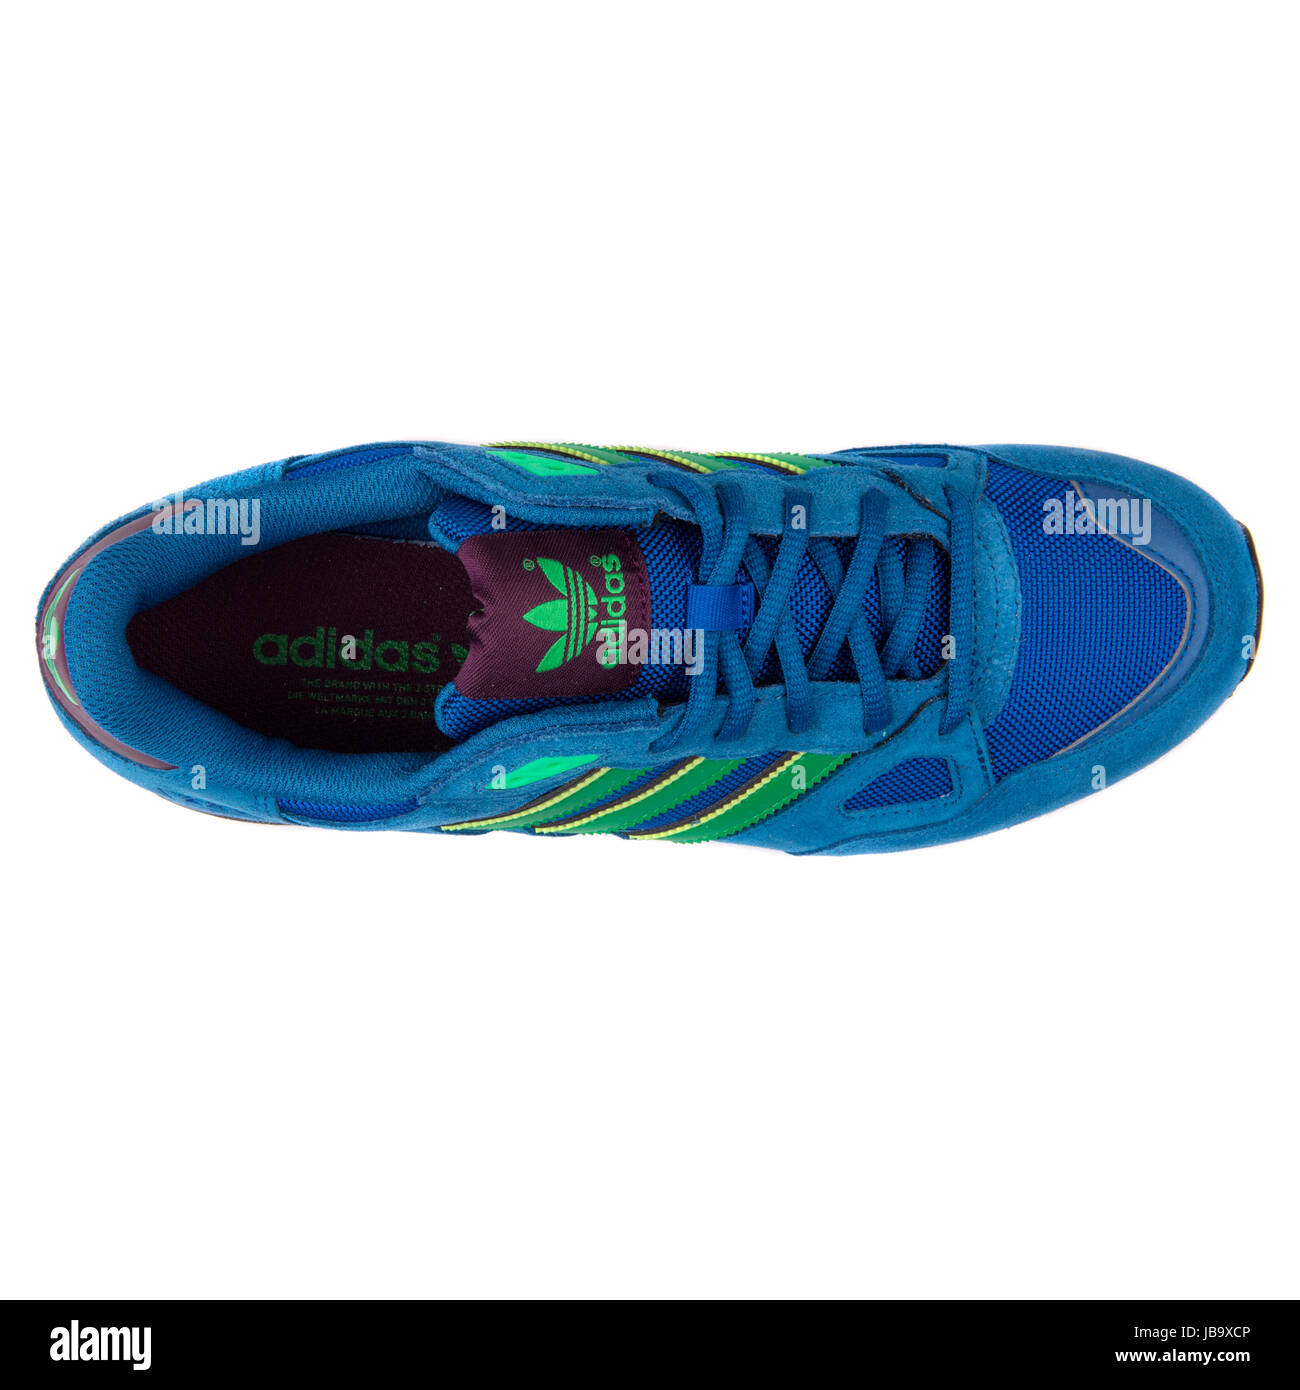 belasting Krimpen Doen Adidas ZX 750 Blue and Green Men's Sports Sneakers - B24857 Stock Photo -  Alamy